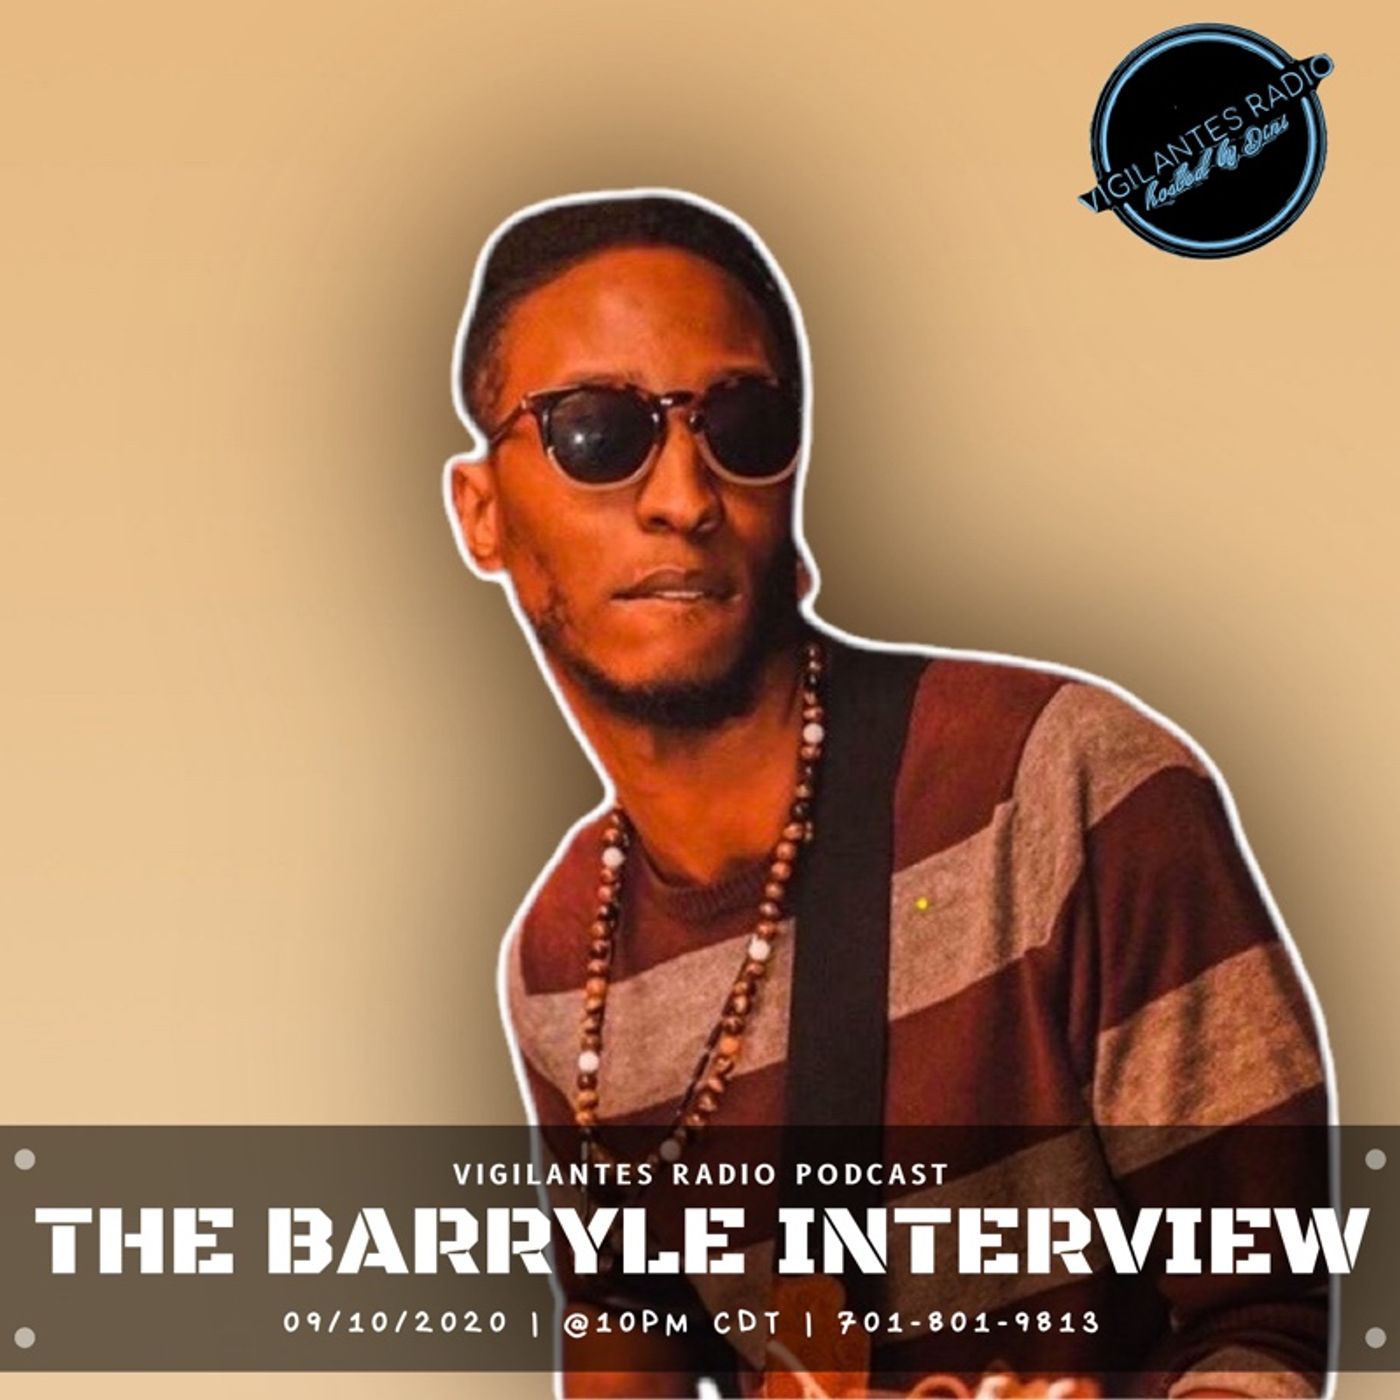 The Barryle Interview. Image